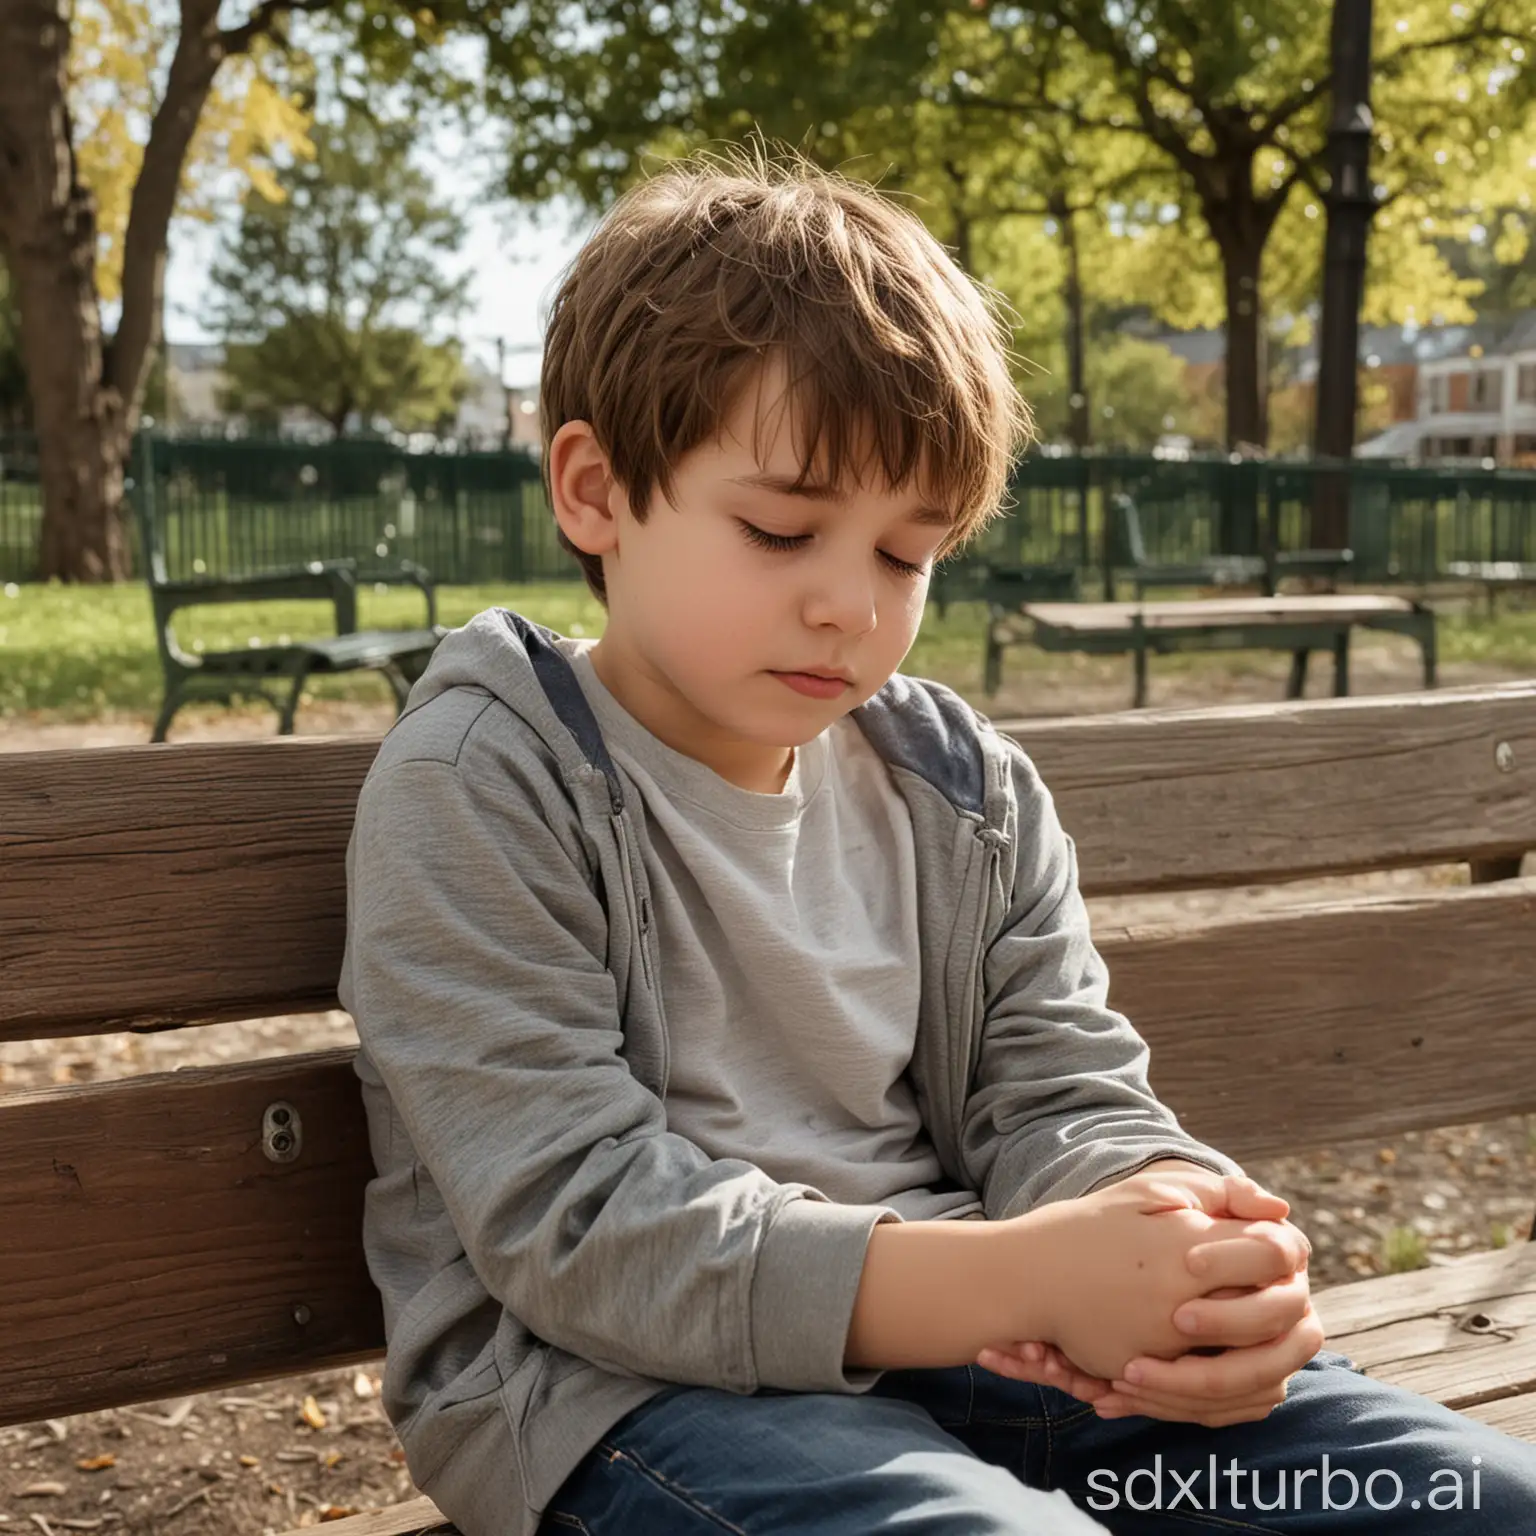 Boy sitting down at a park bench, eyes closed and slumped against the bench